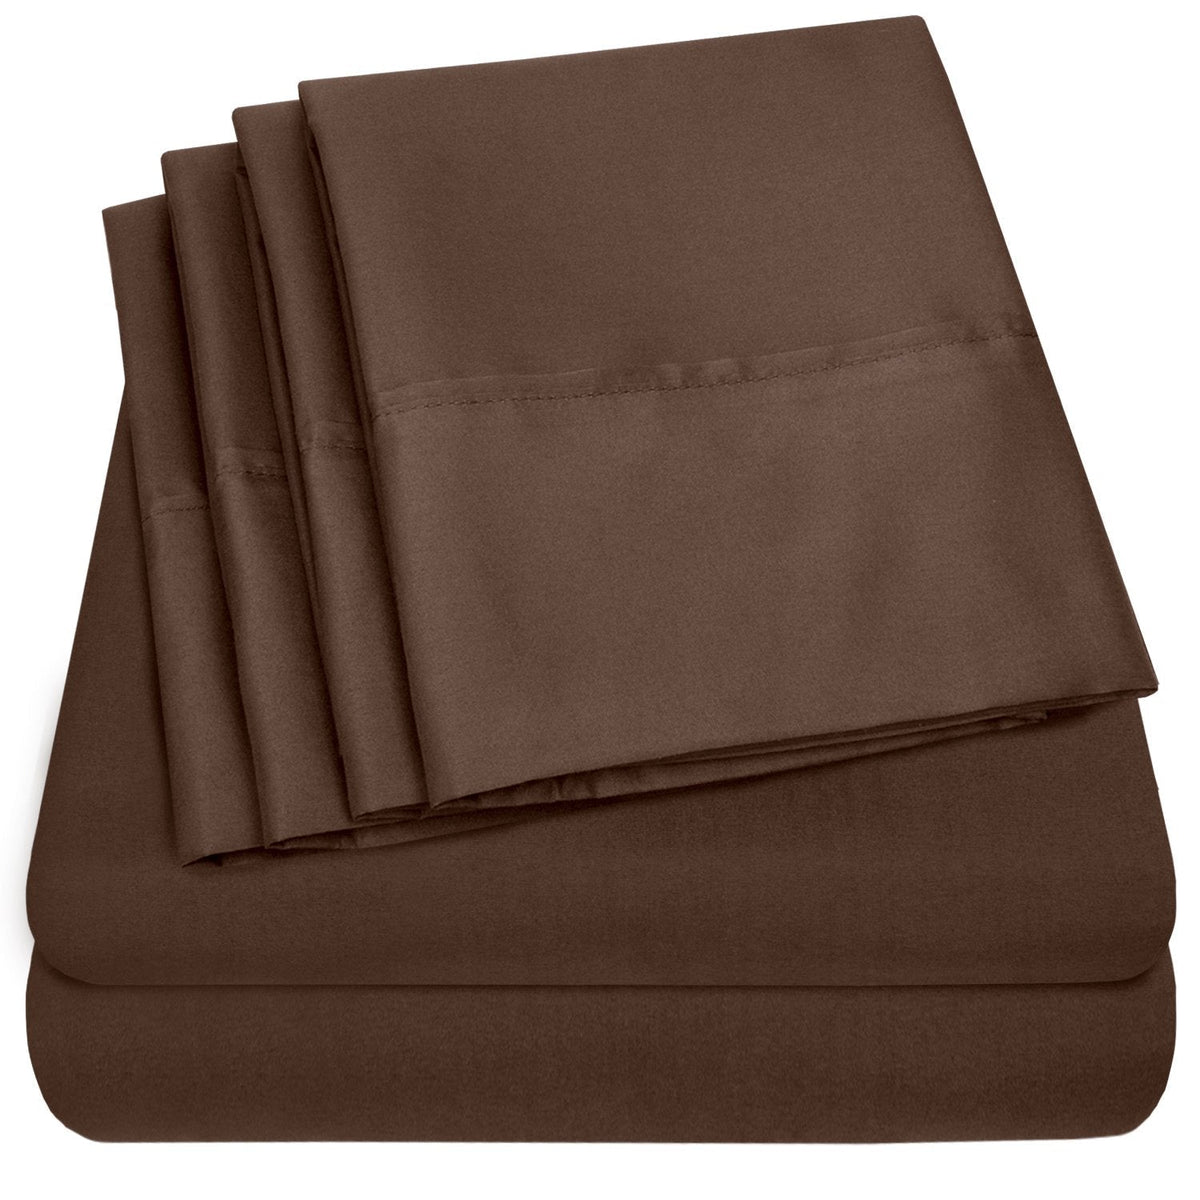 Deluxe 6-Piece Bed Sheet Set (Chocolate) - Folded